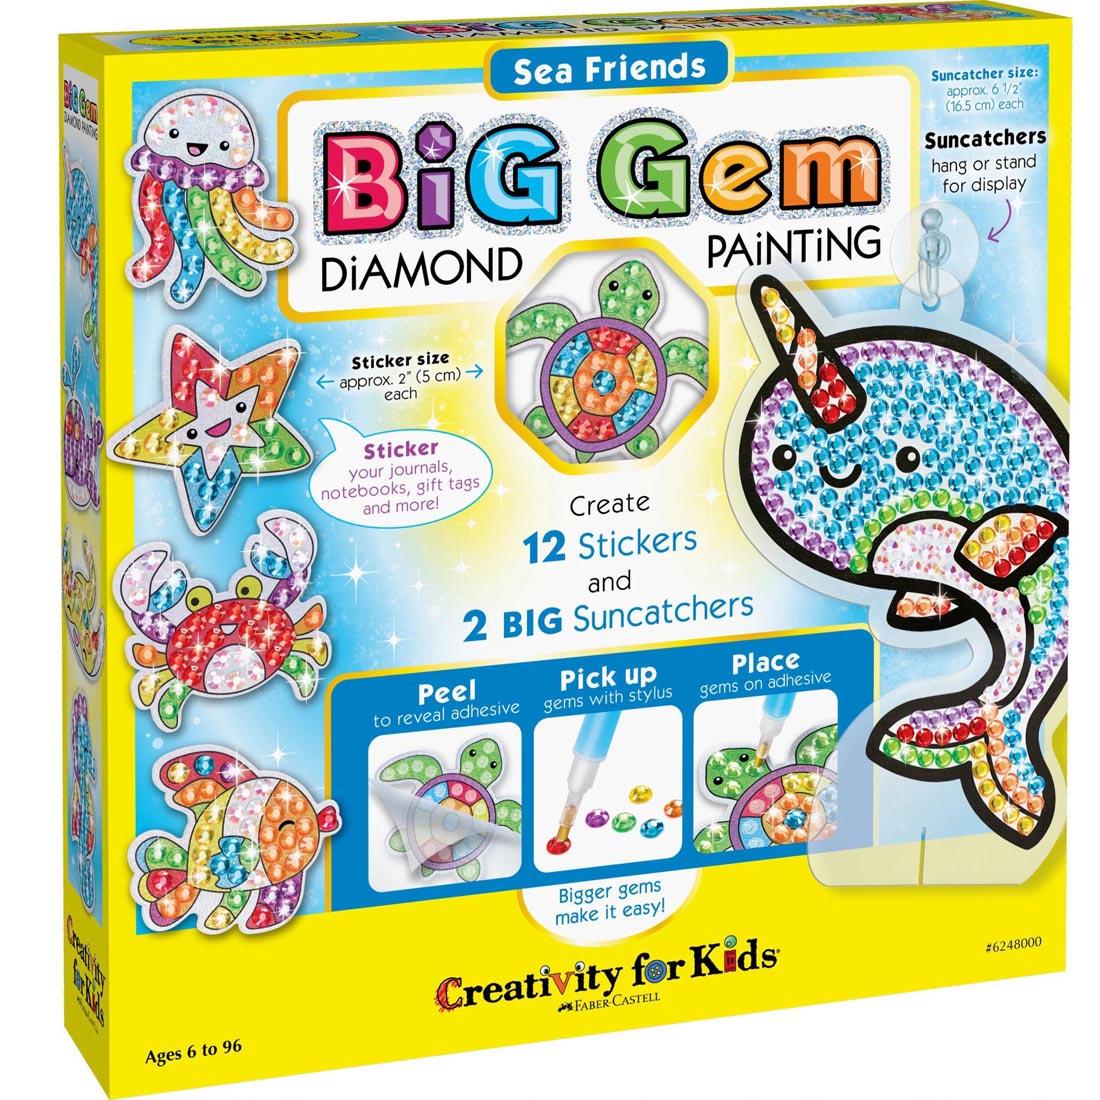 Big Gem Diamond Painting Sea Friends Kit By Creativity For Kids, front of box